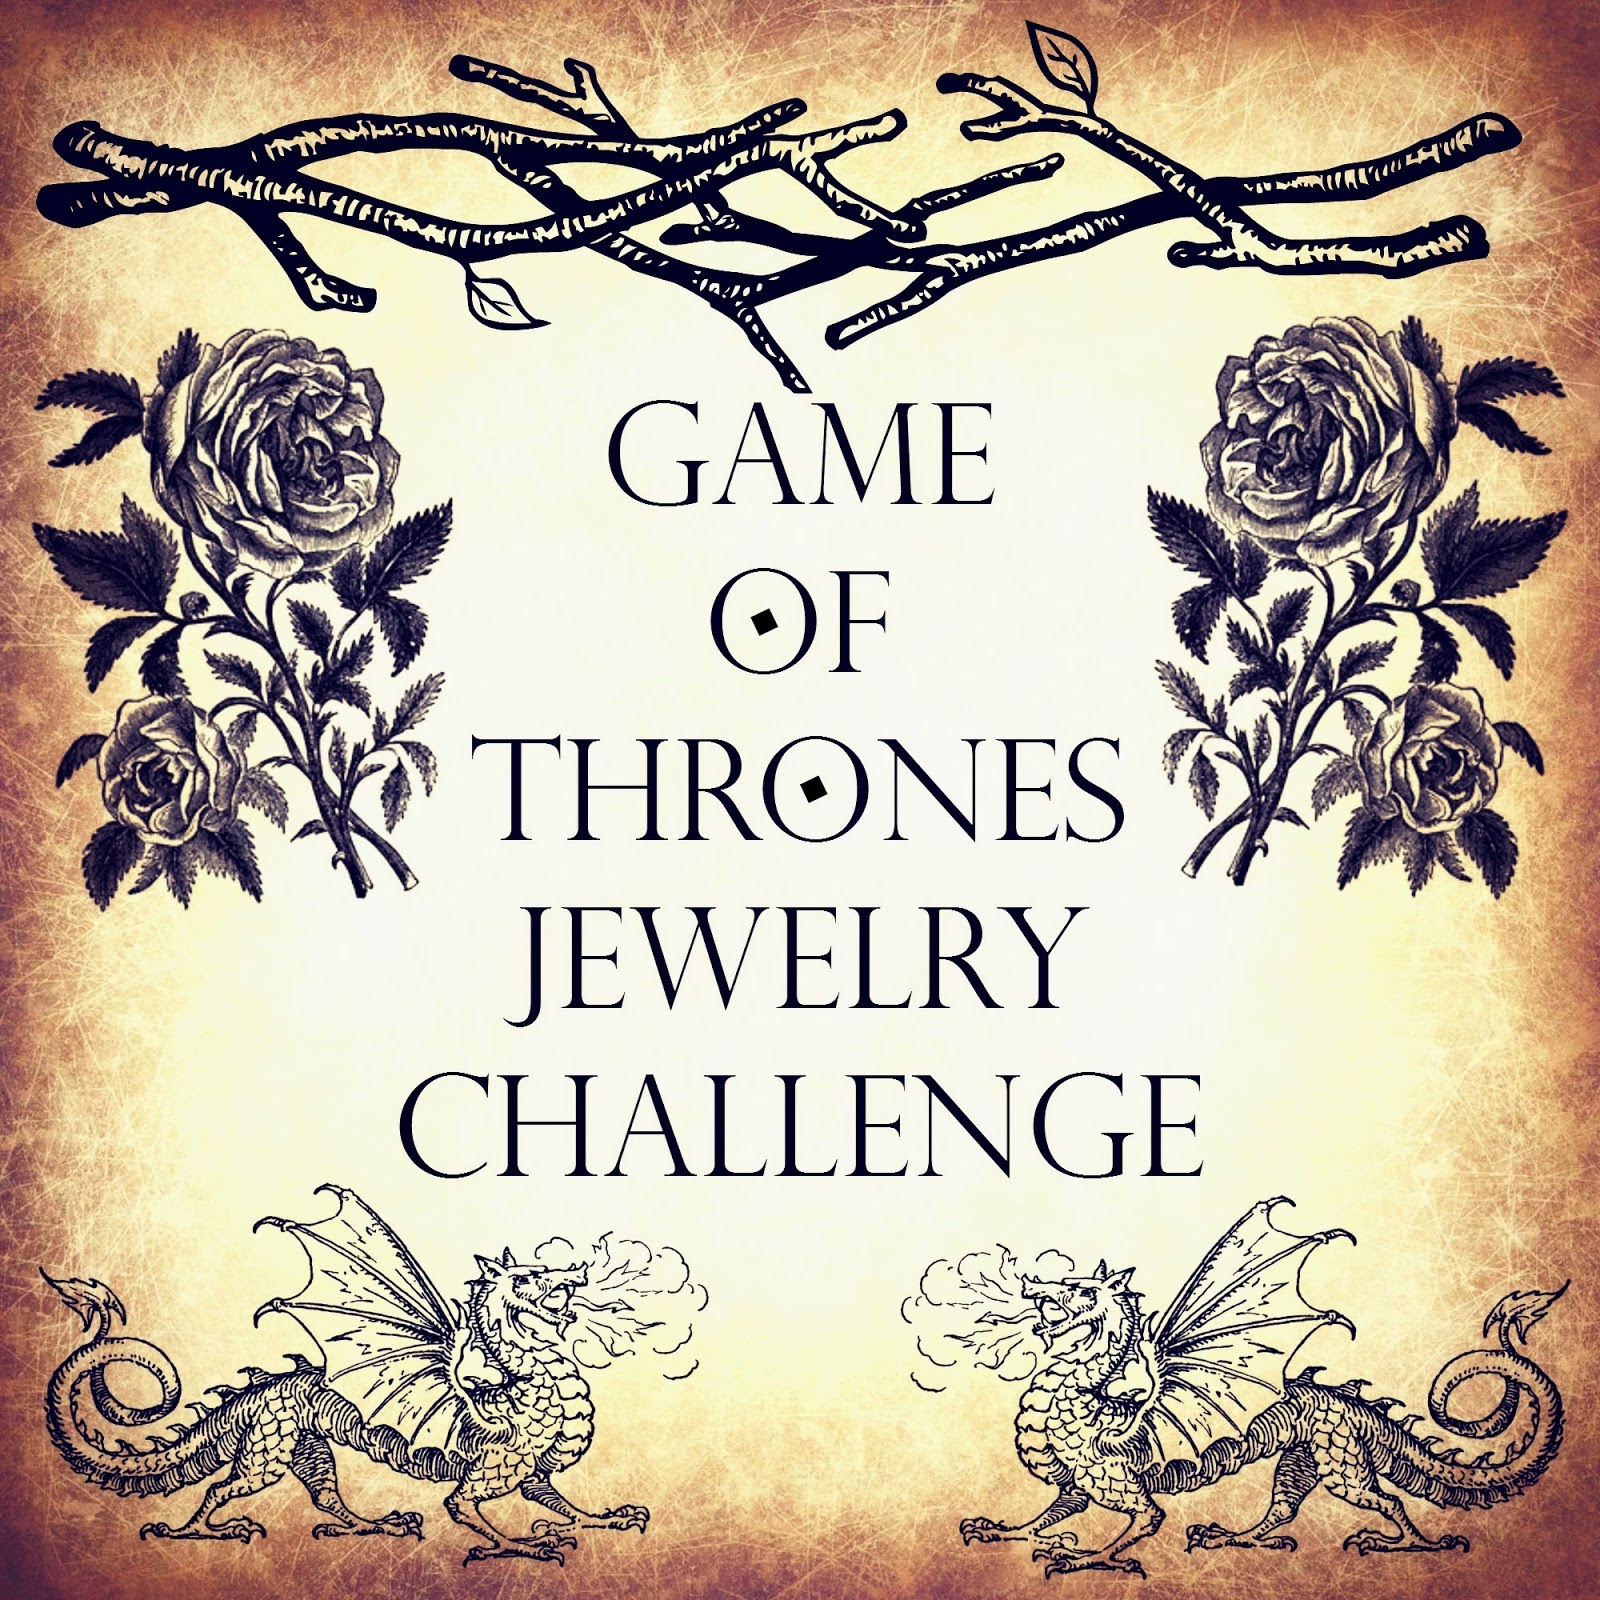 Game of Thrones Jewelry Challenge